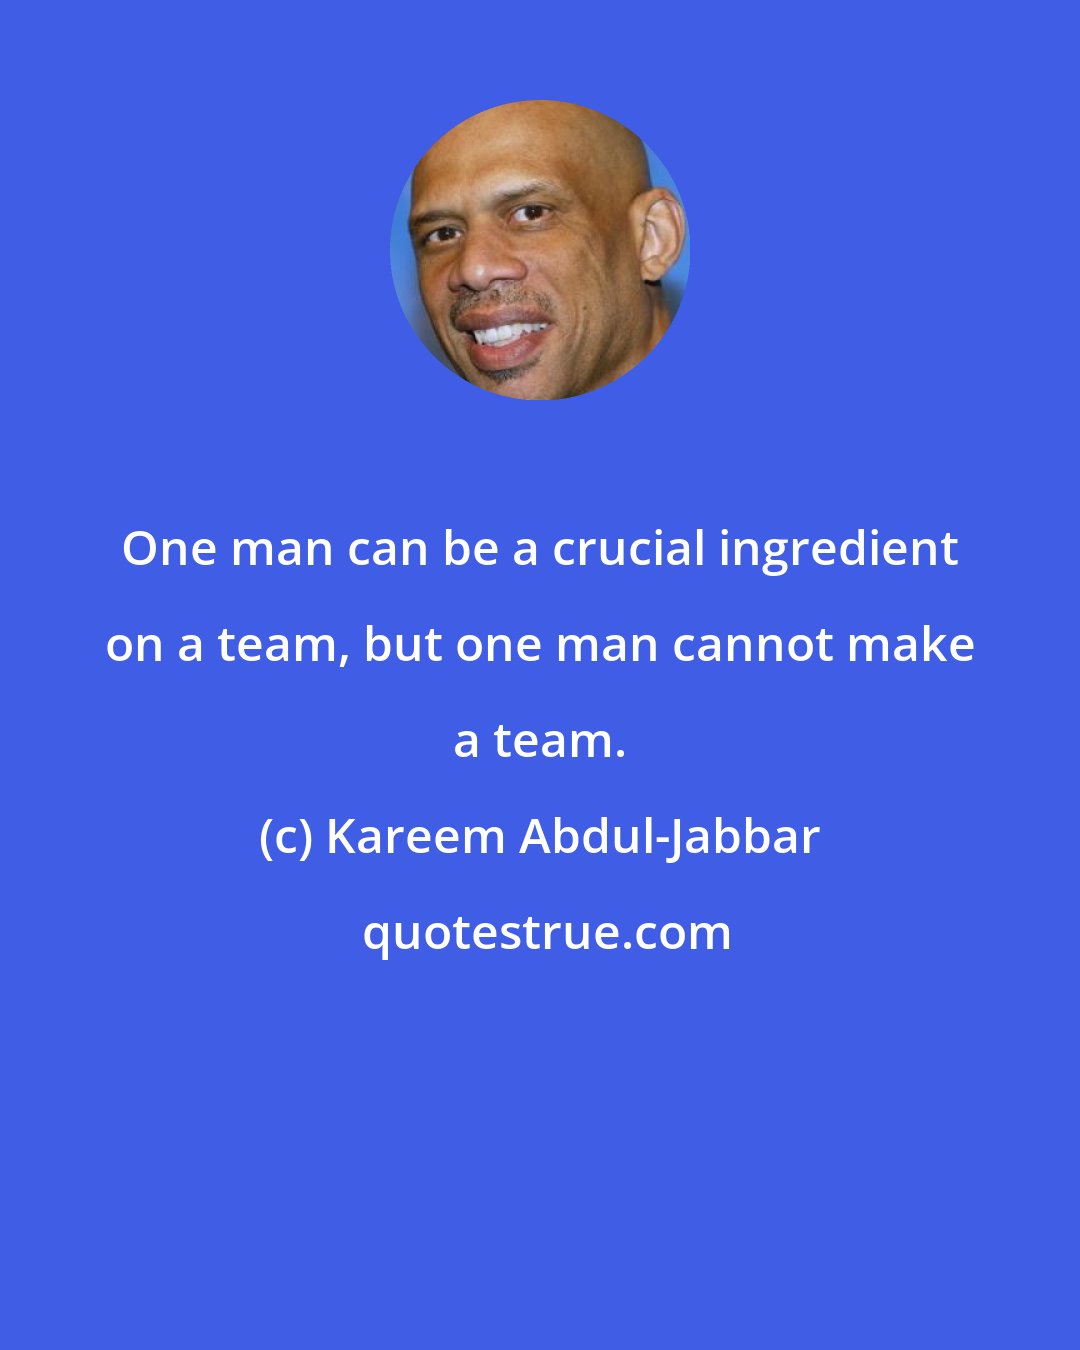 Kareem Abdul-Jabbar: One man can be a crucial ingredient on a team, but one man cannot make a team.